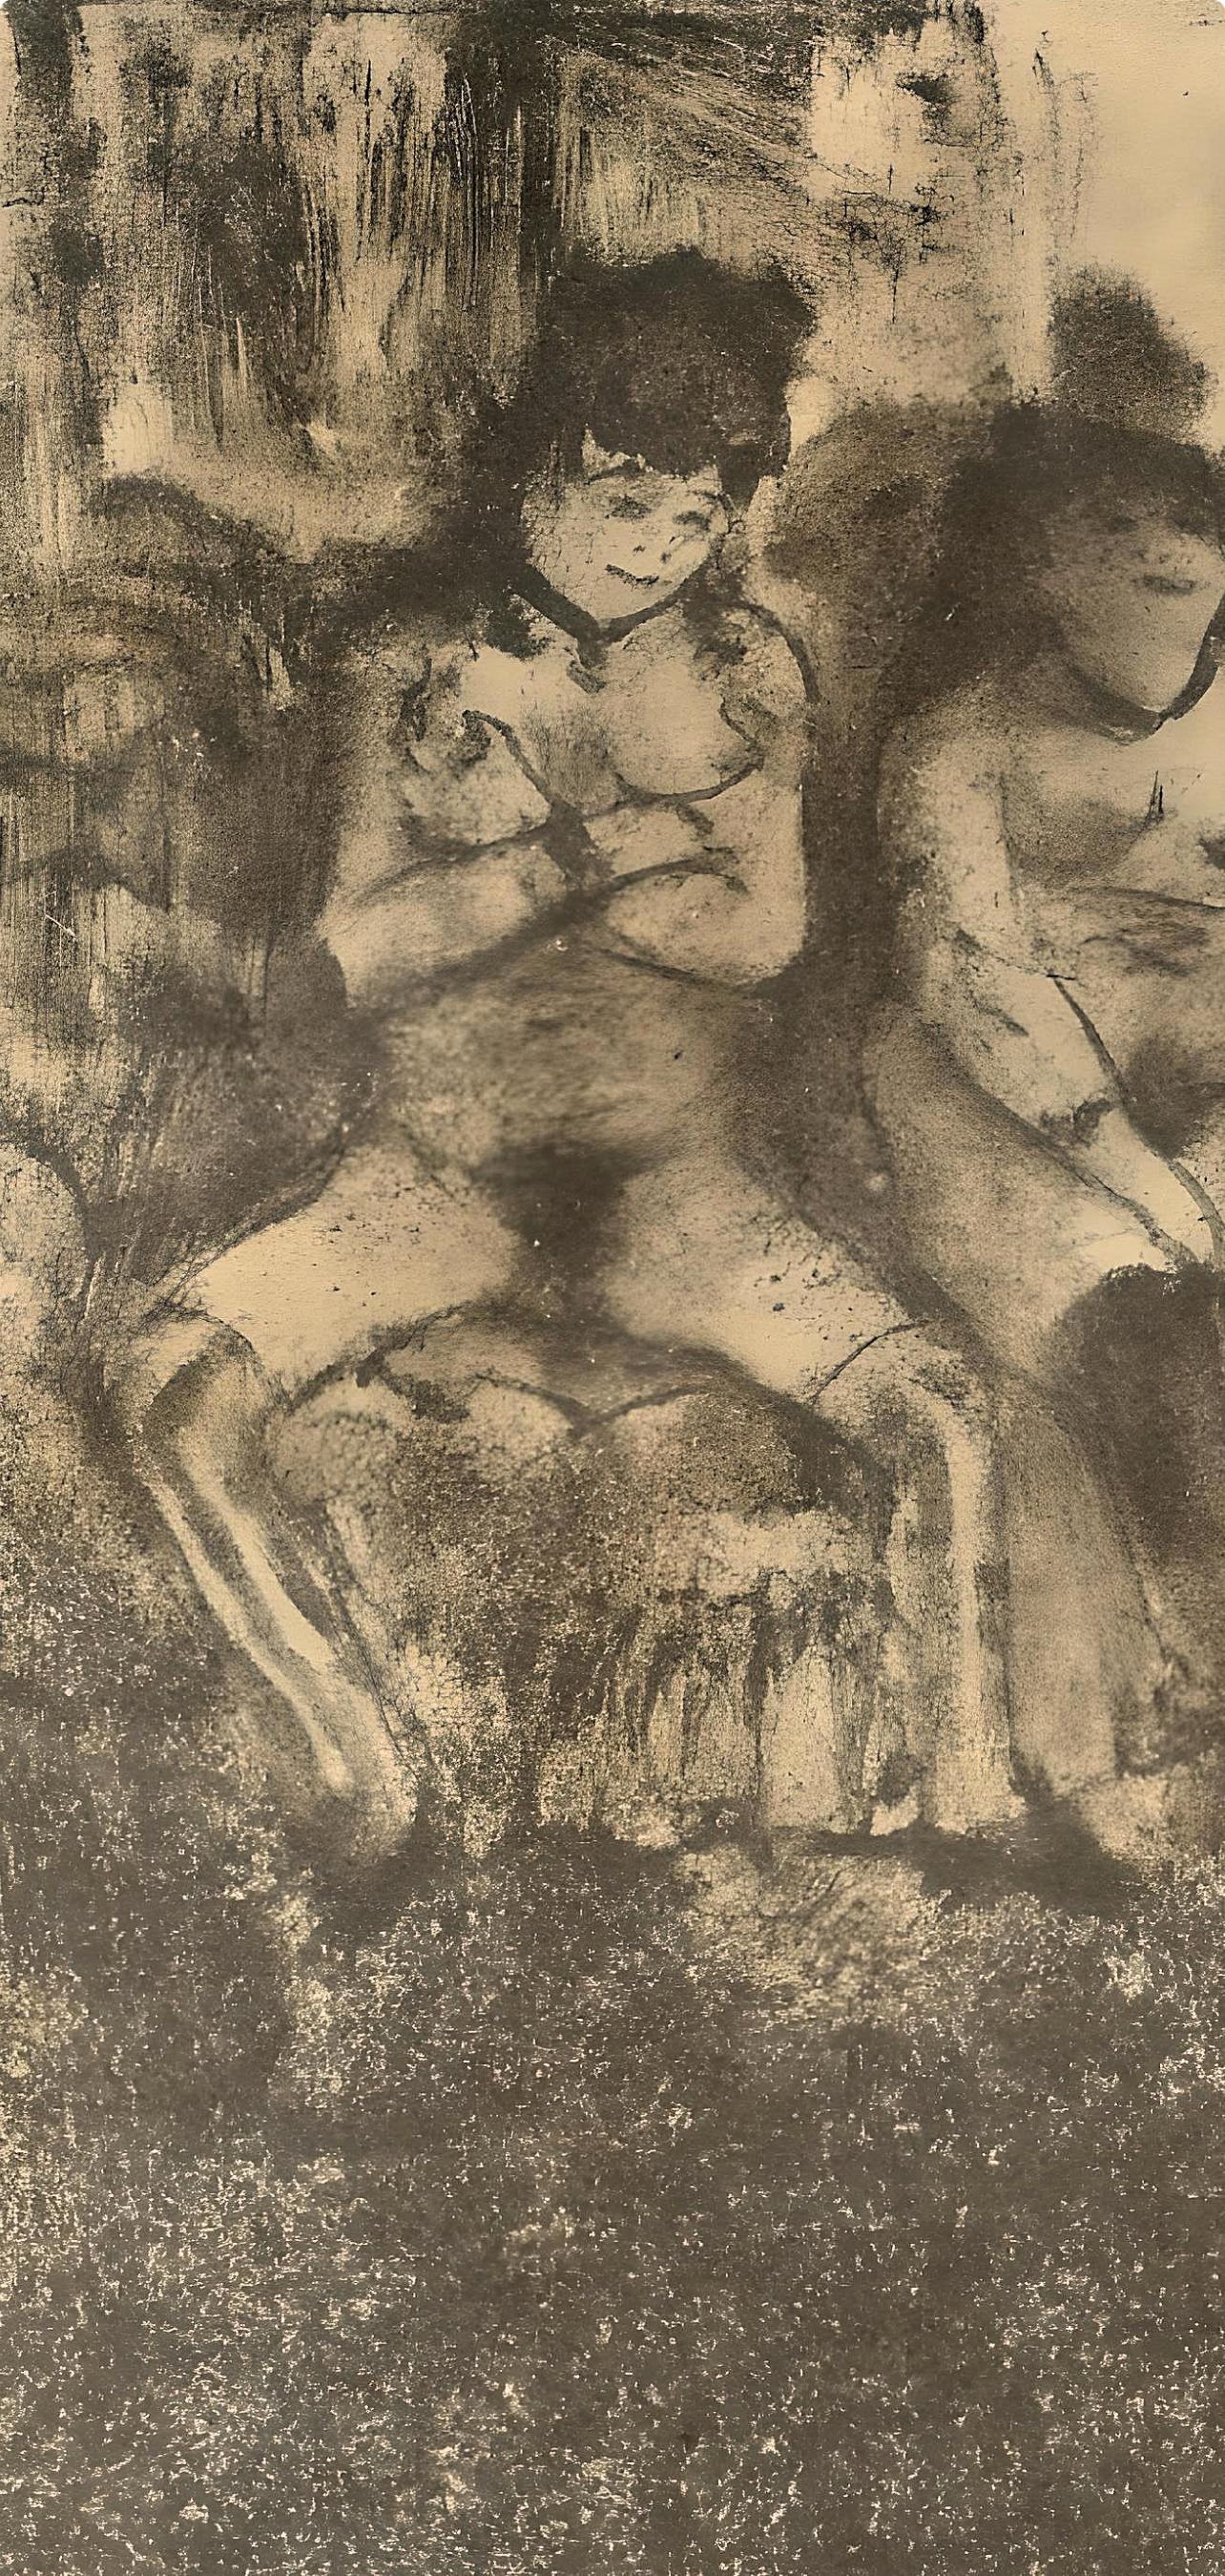 Degas, On attend les Clients, Les Monotypes (after) - Print by Edgar Degas